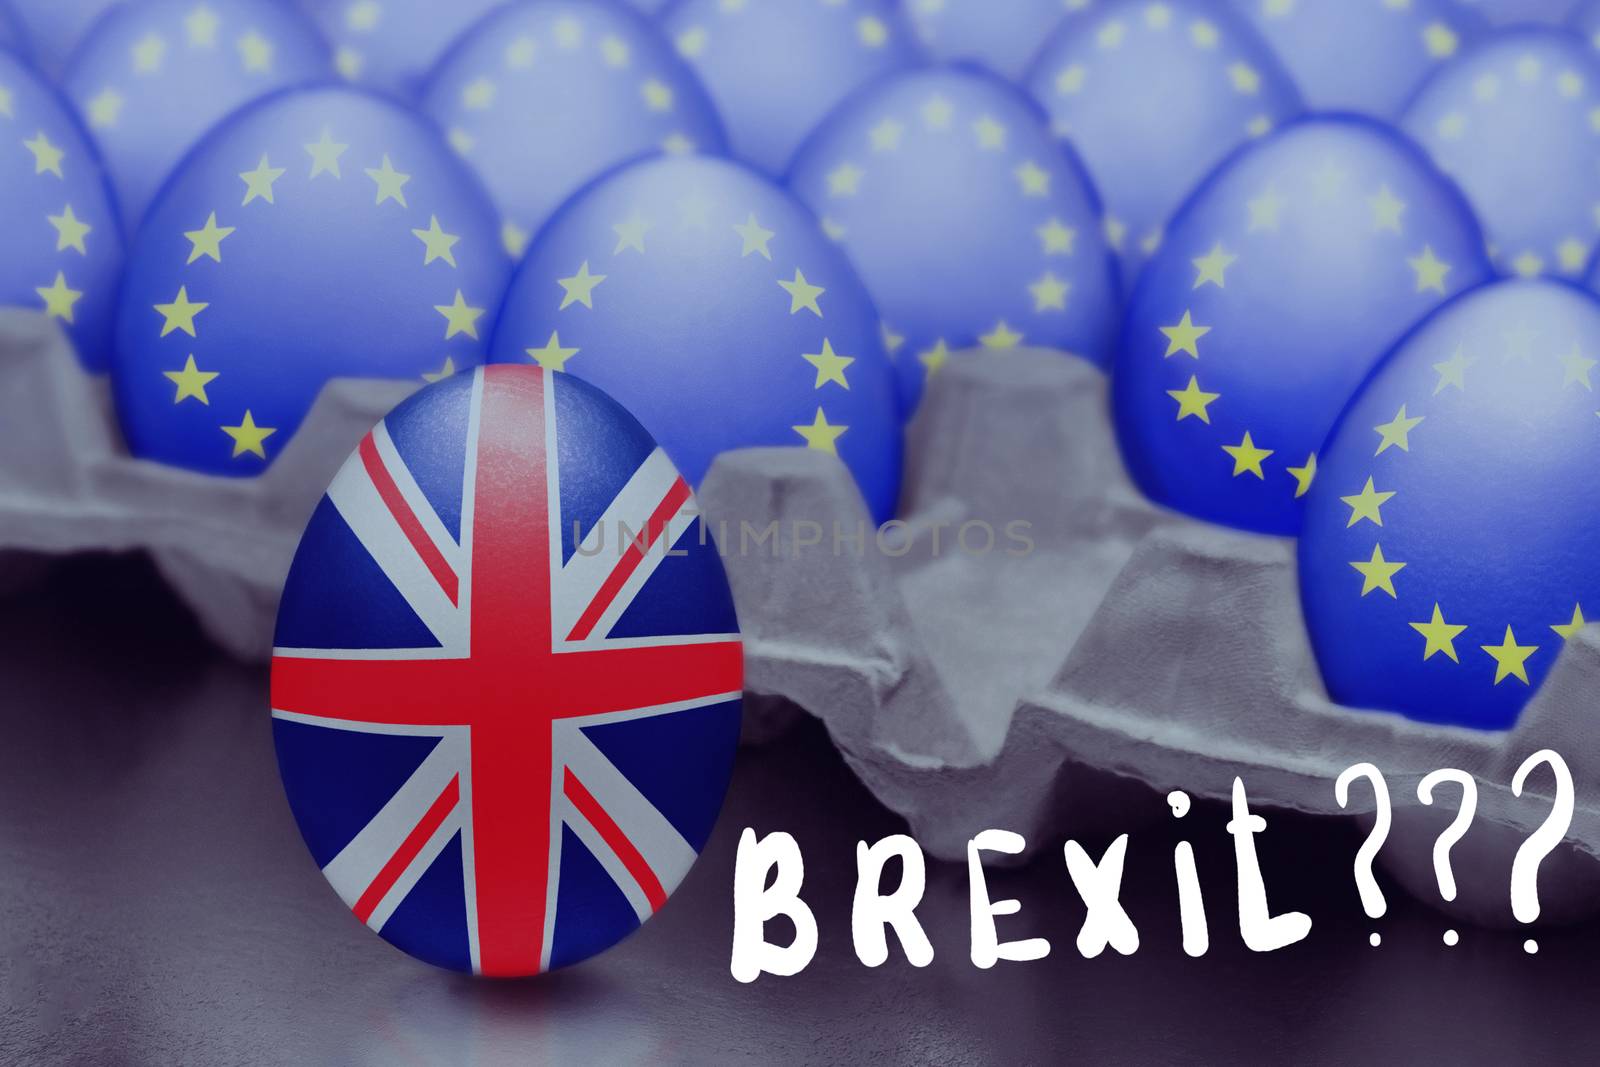 Concept of Brexit is presented from jumping egg with a British flag out of the box with eggs with the flag of the European Union and Brexit inscribed with question marks by galsand